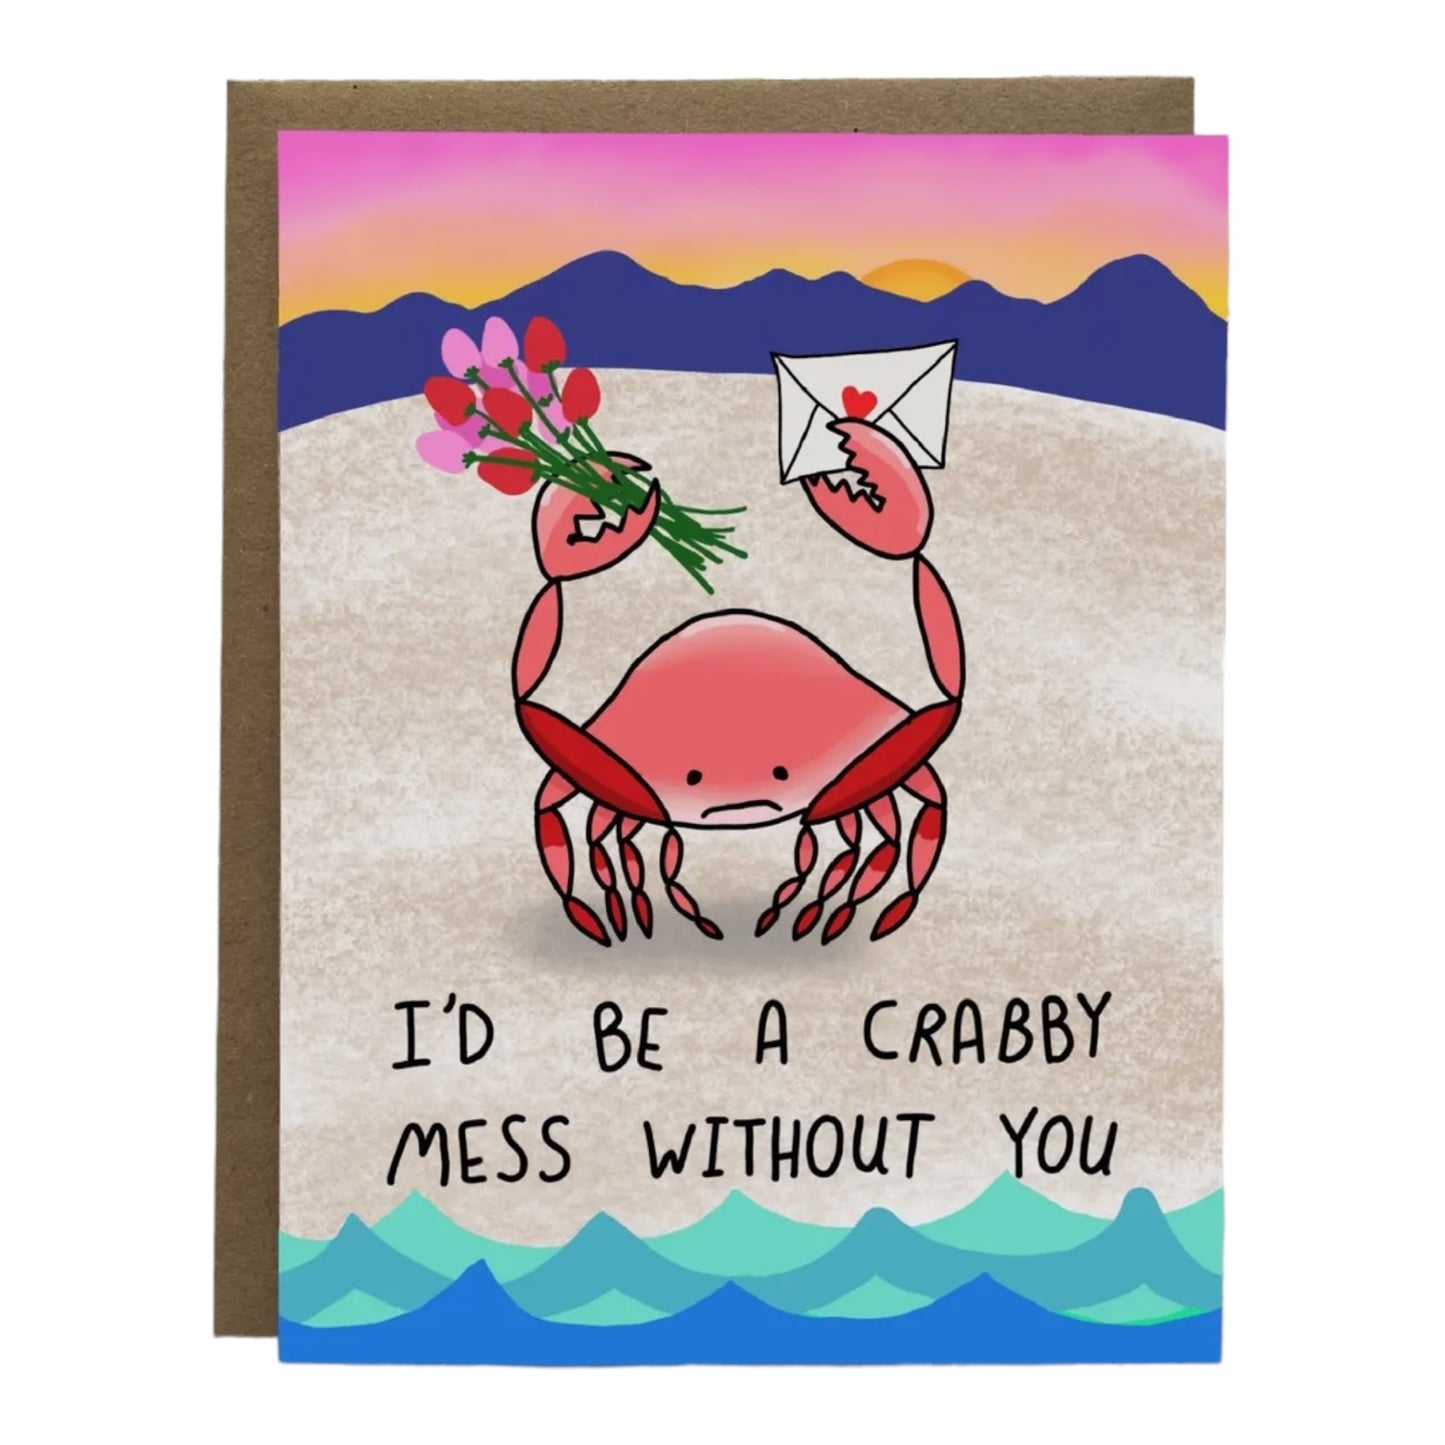 I’d Be a Crabby Mess Without You Greeting Card